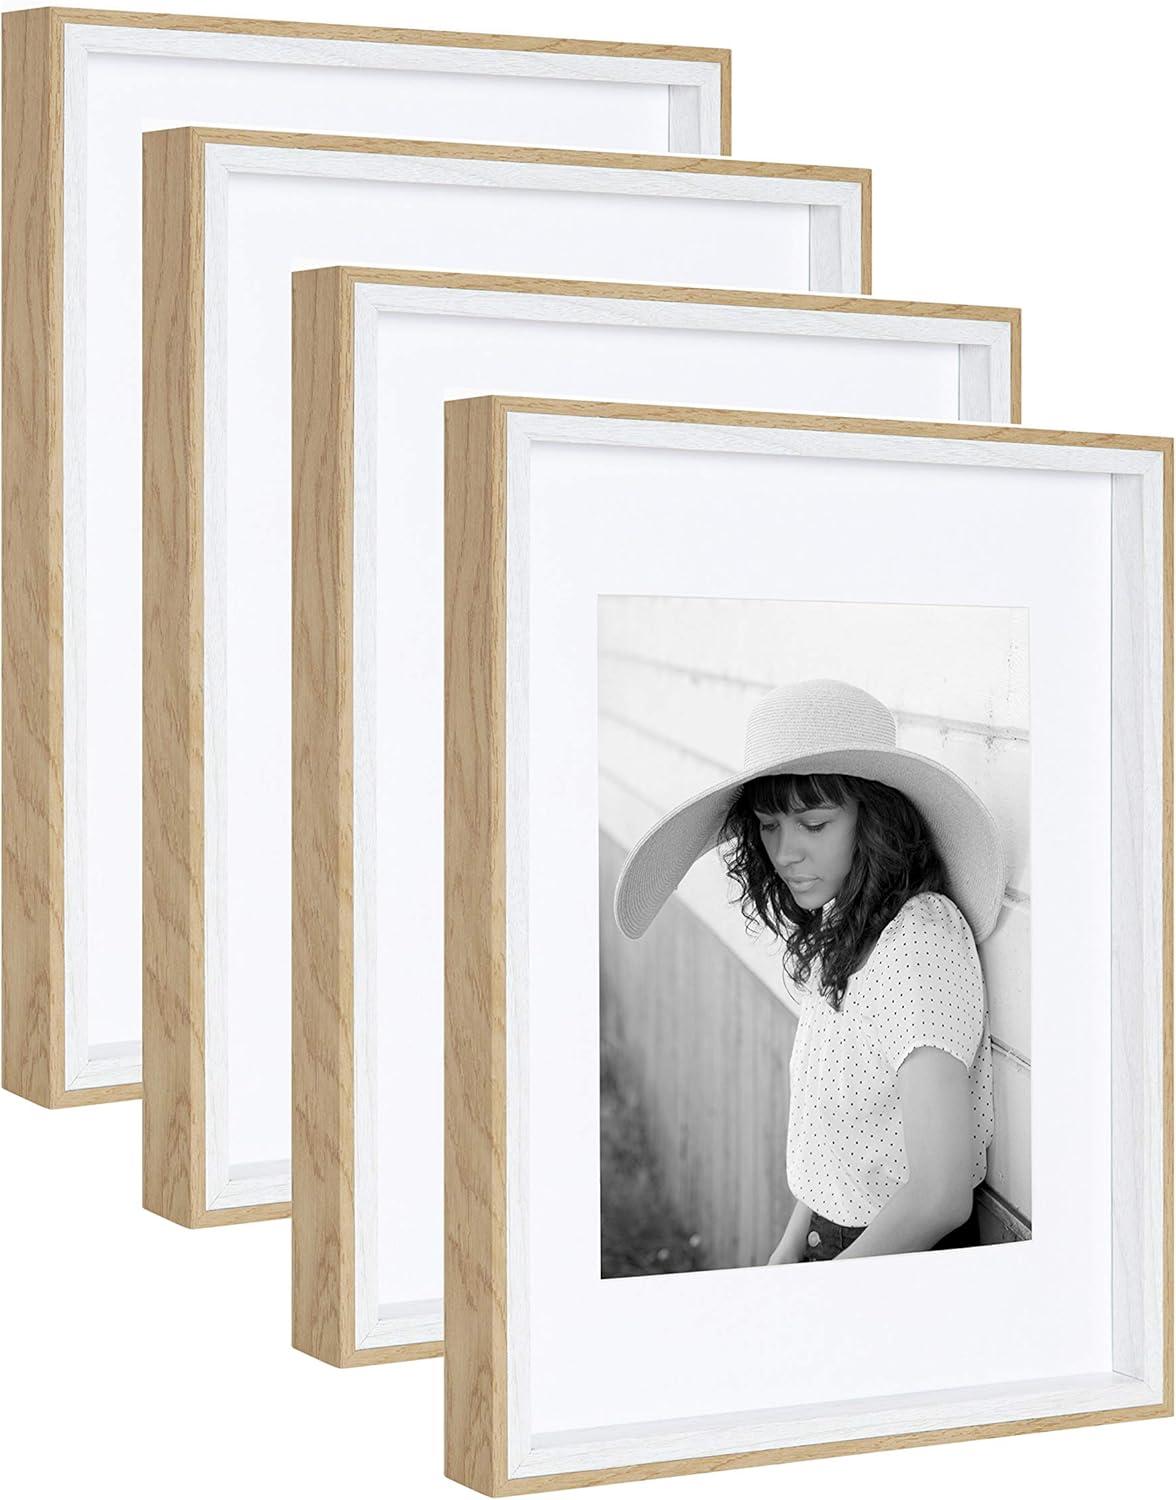 Scandinavian-Inspired Gibson Frame Set, 11" x 14", White and Natural